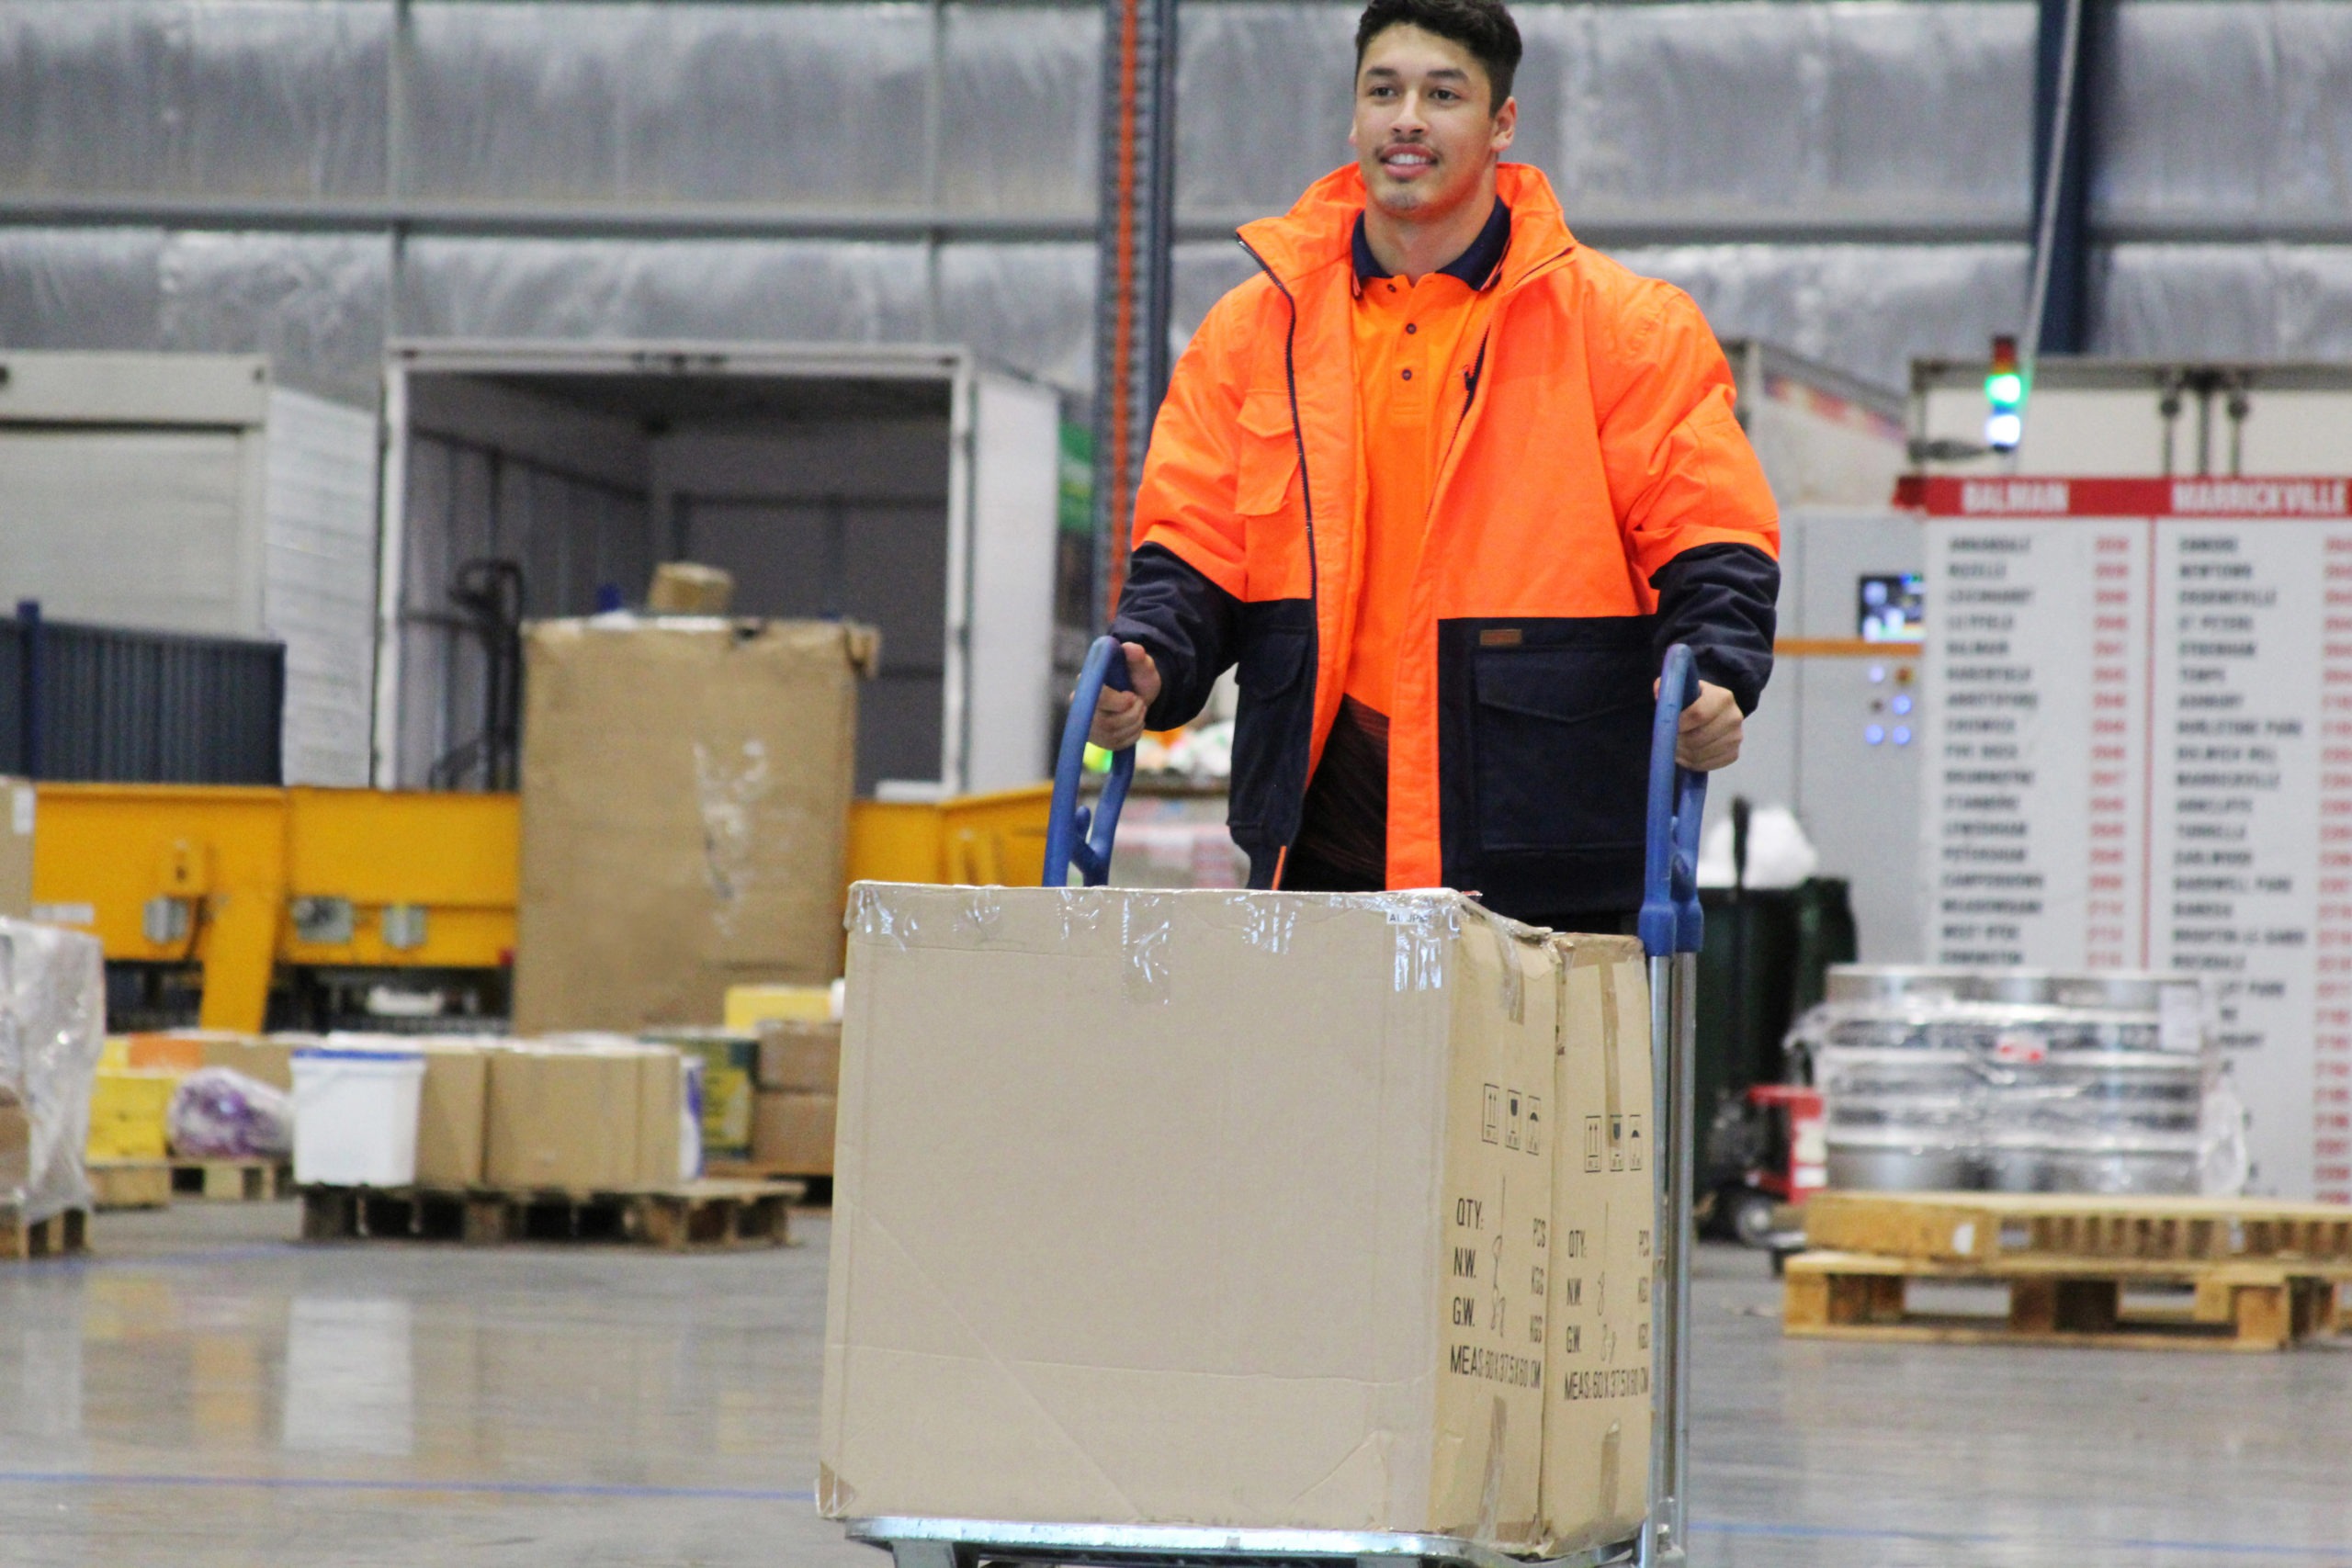 Guy-with-trolley-and-parcels-scaled.jpg